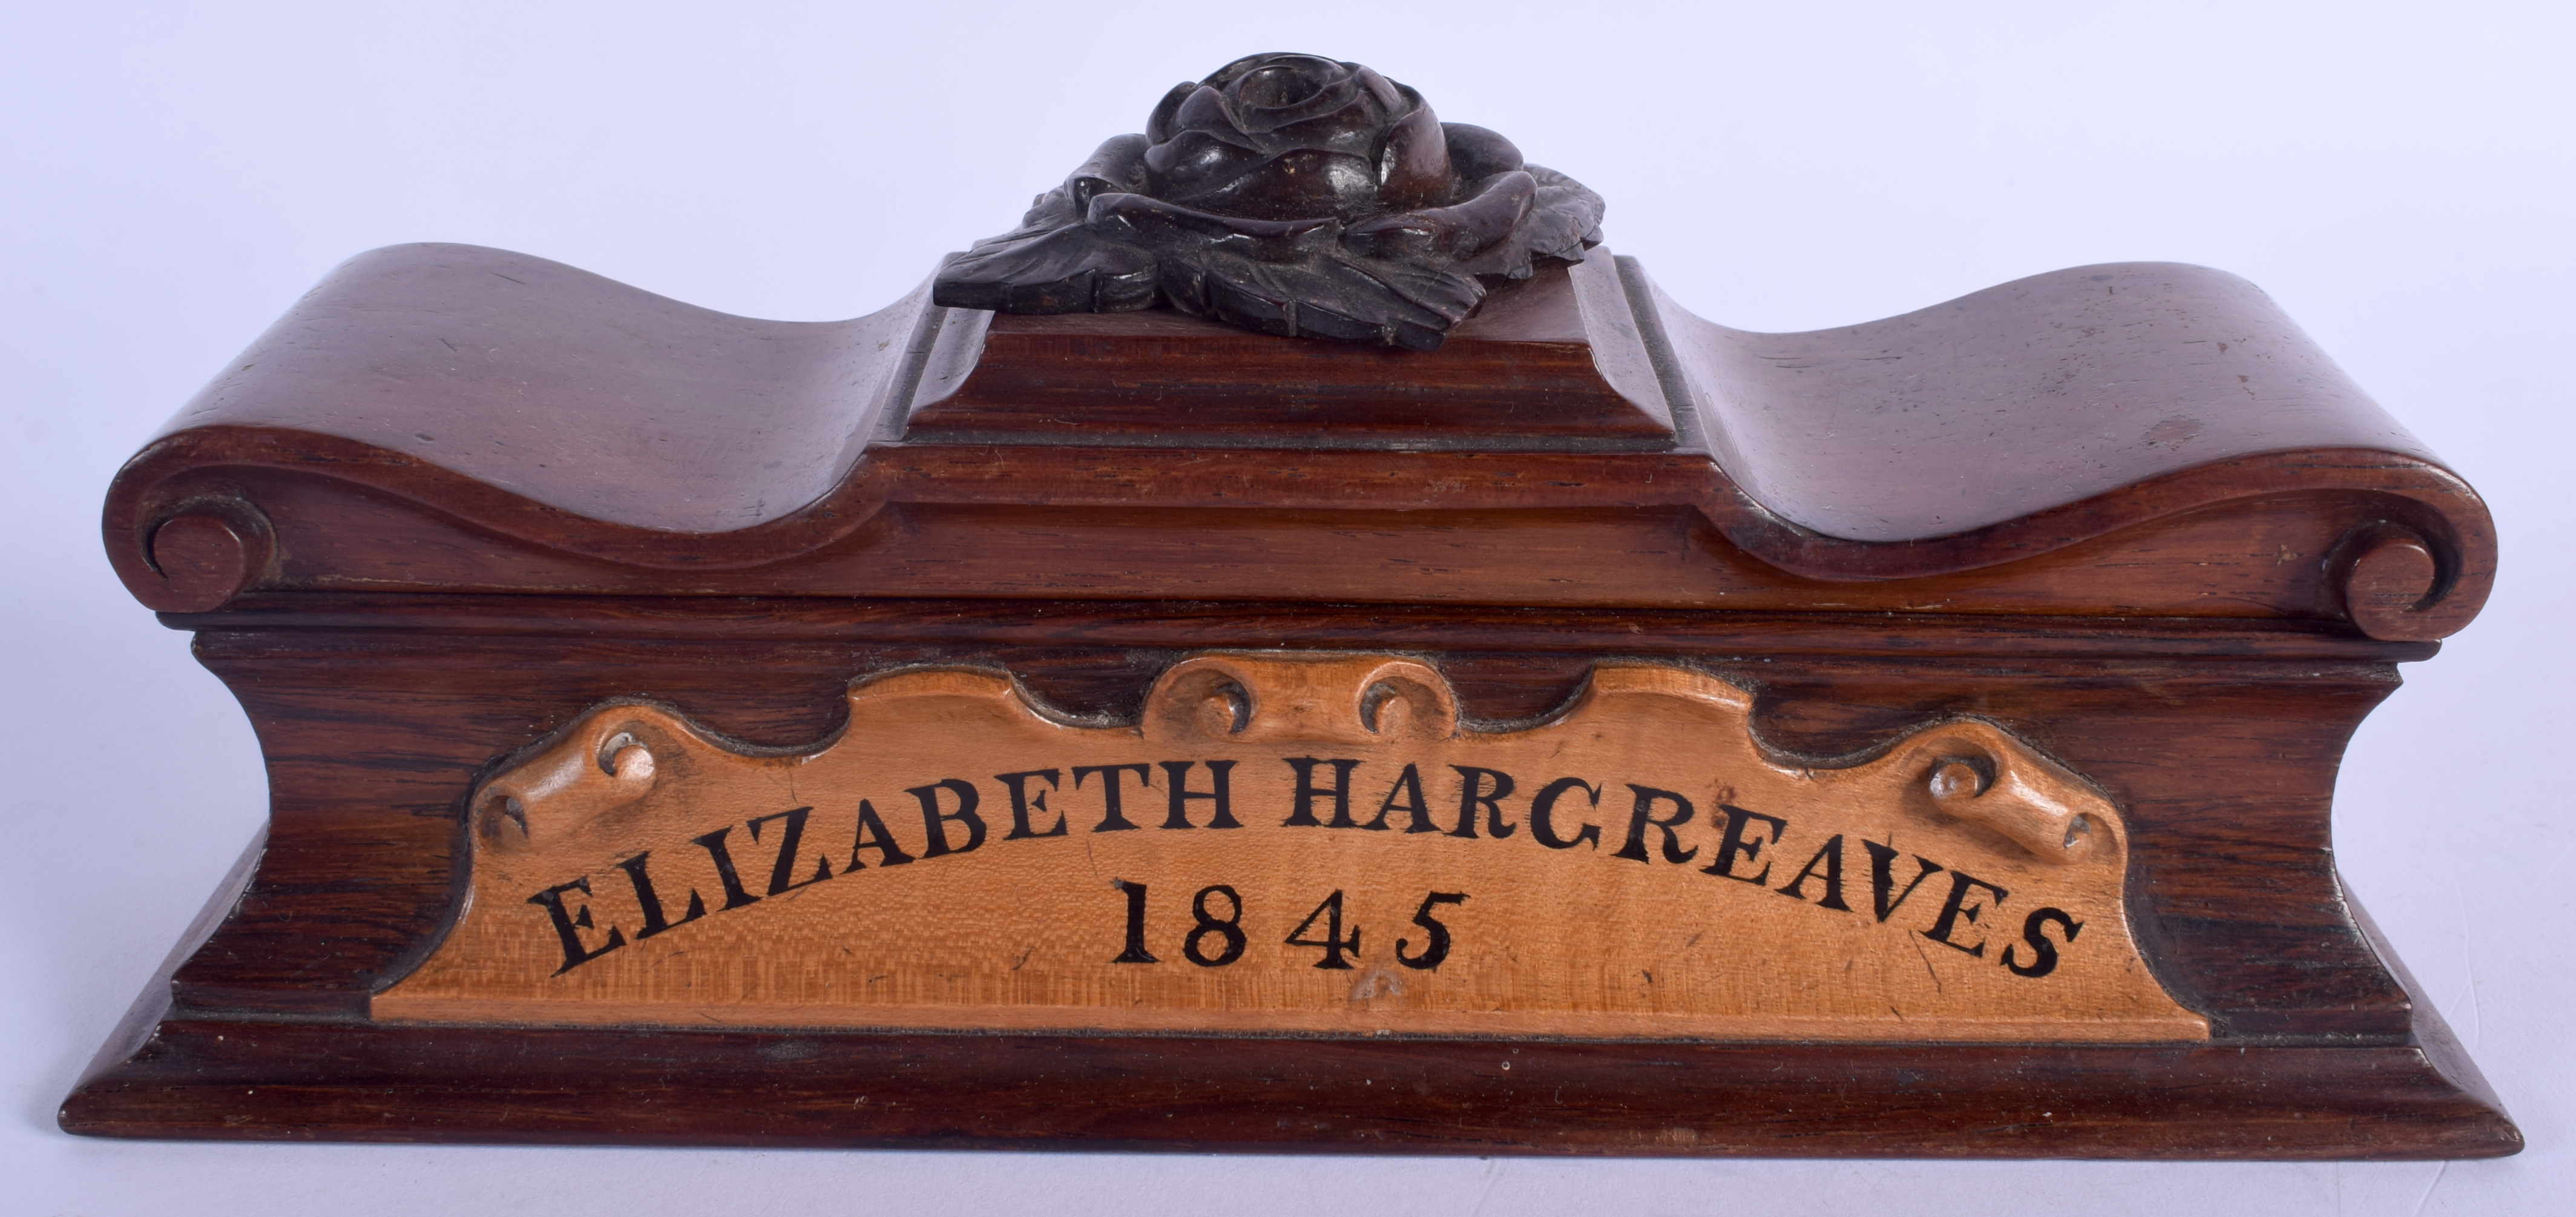 A RARE 19TH CENTURY ELIZABETH HARGREAVES 1845 RECTANGULAR BOX with floral finial. 22 cm wide.